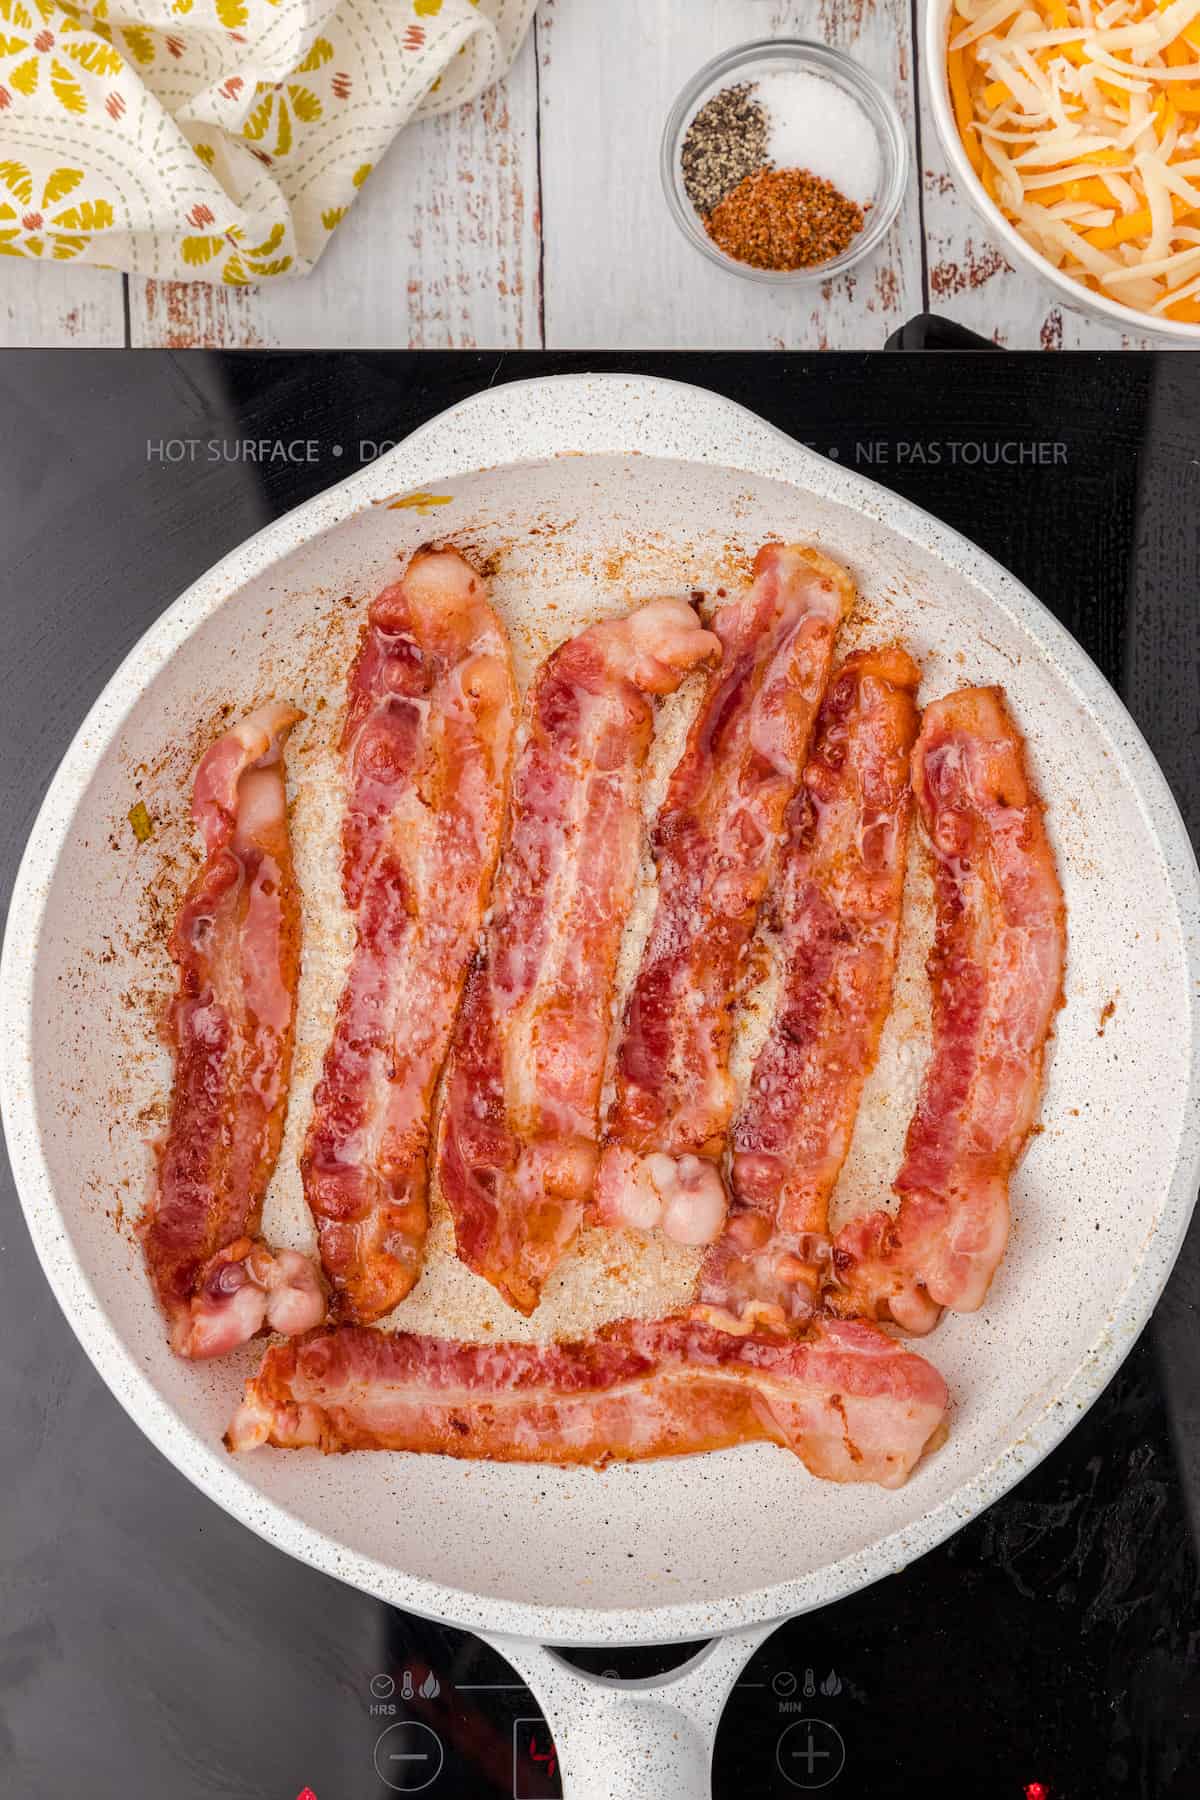 fry the bacon in a skillet